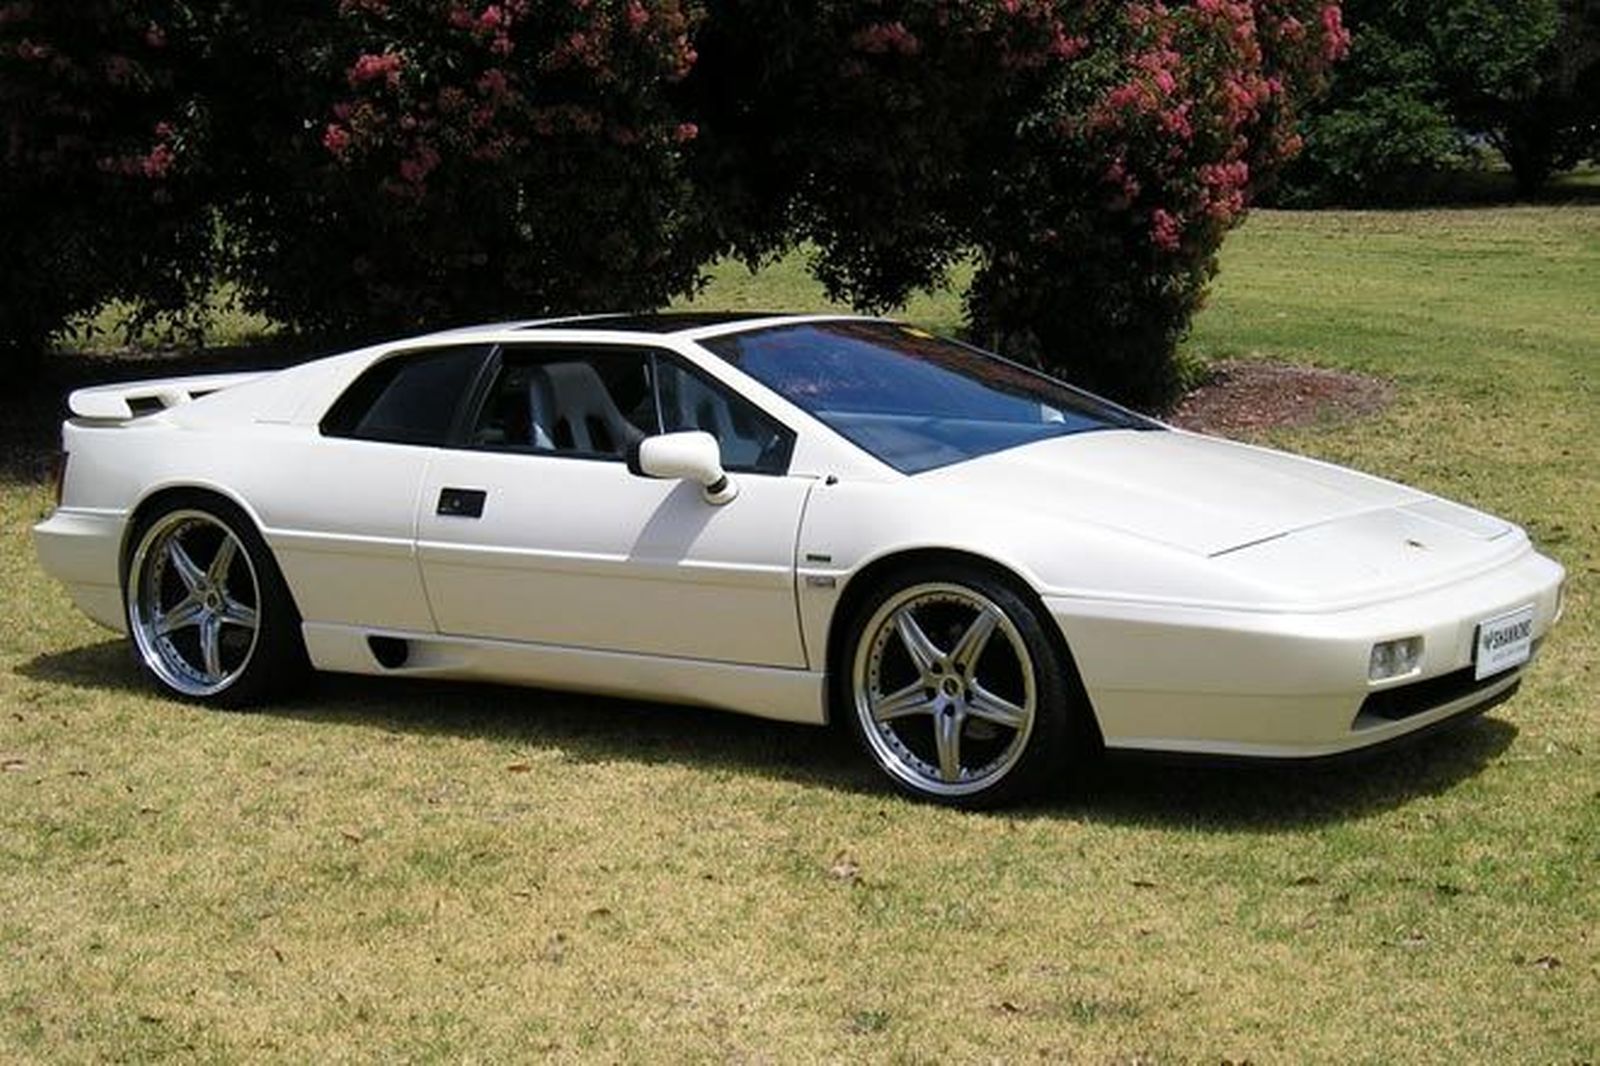 Lotus Esprit Turbo SE parked at a field